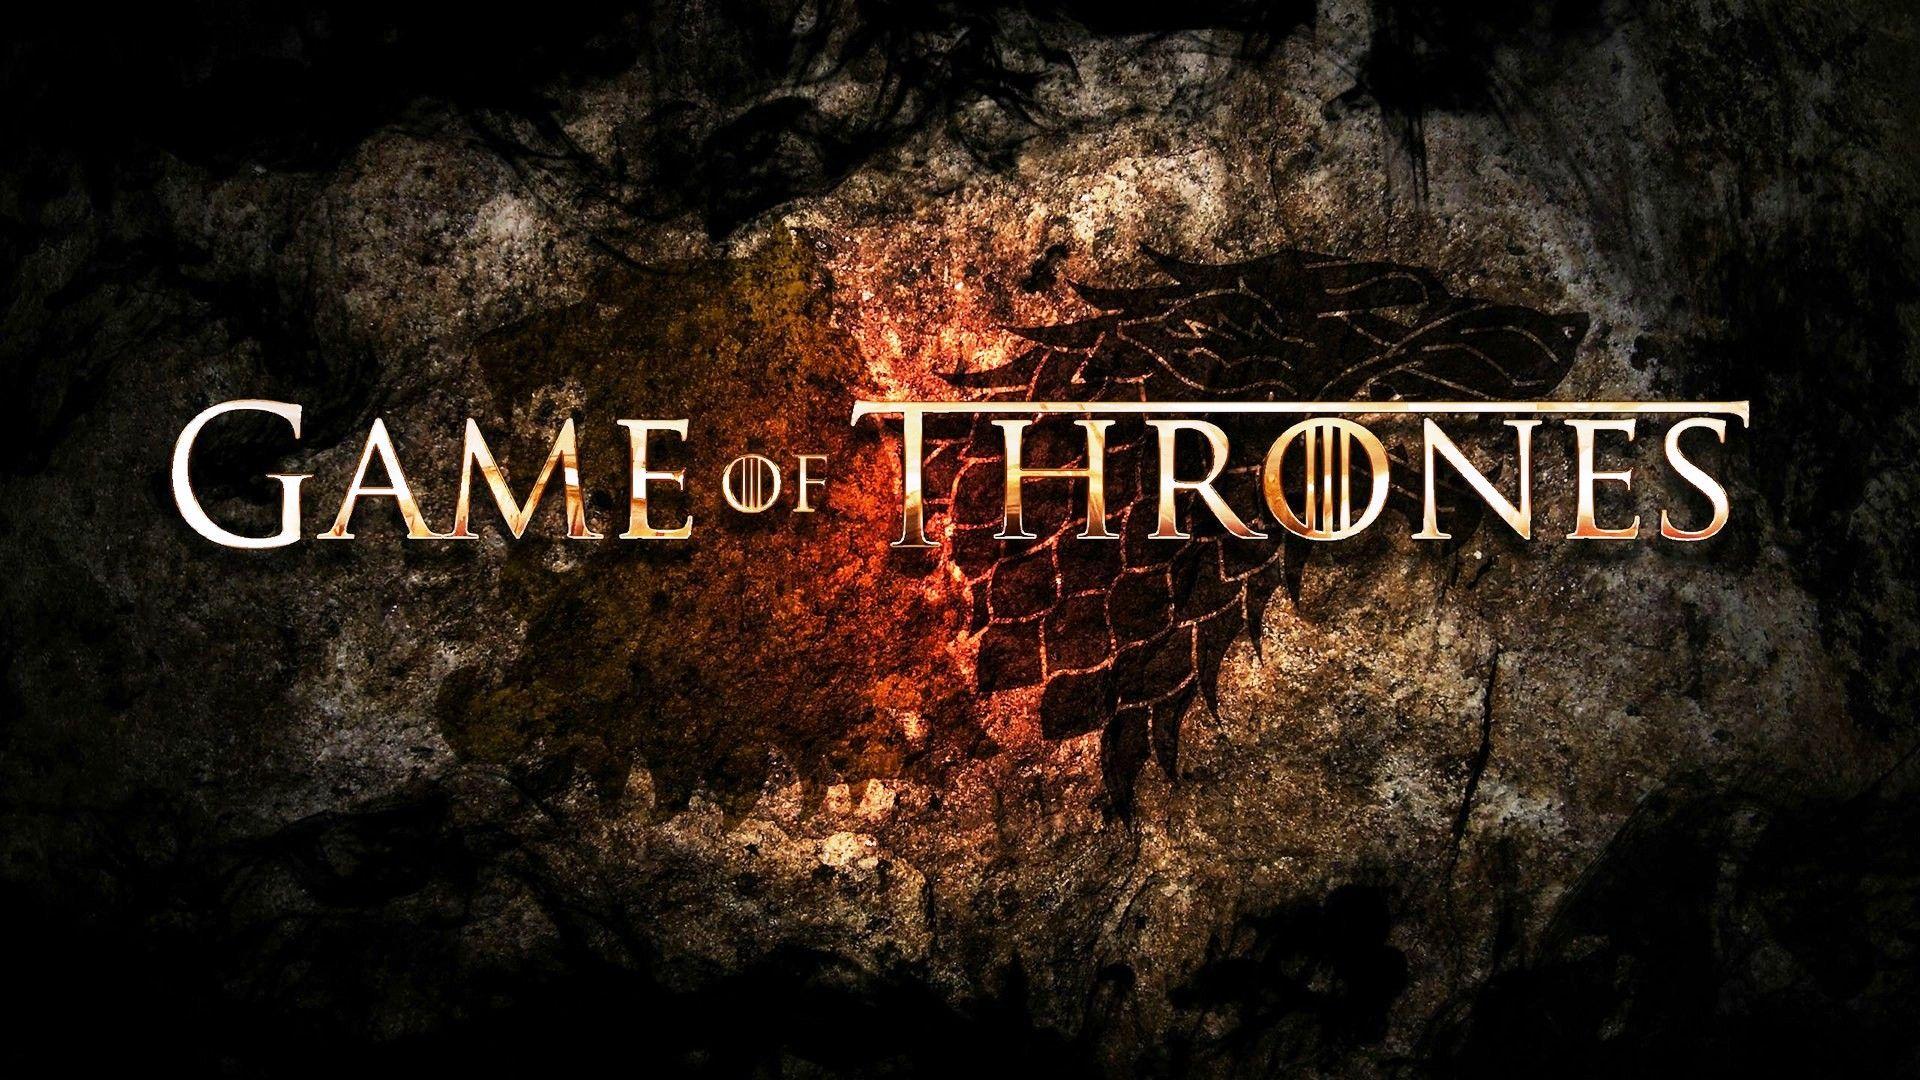 HD Background Game of Thrones Movie Poster Wallpaper HD. Watch game of thrones, Game of thrones theme, Game of thrones prequel